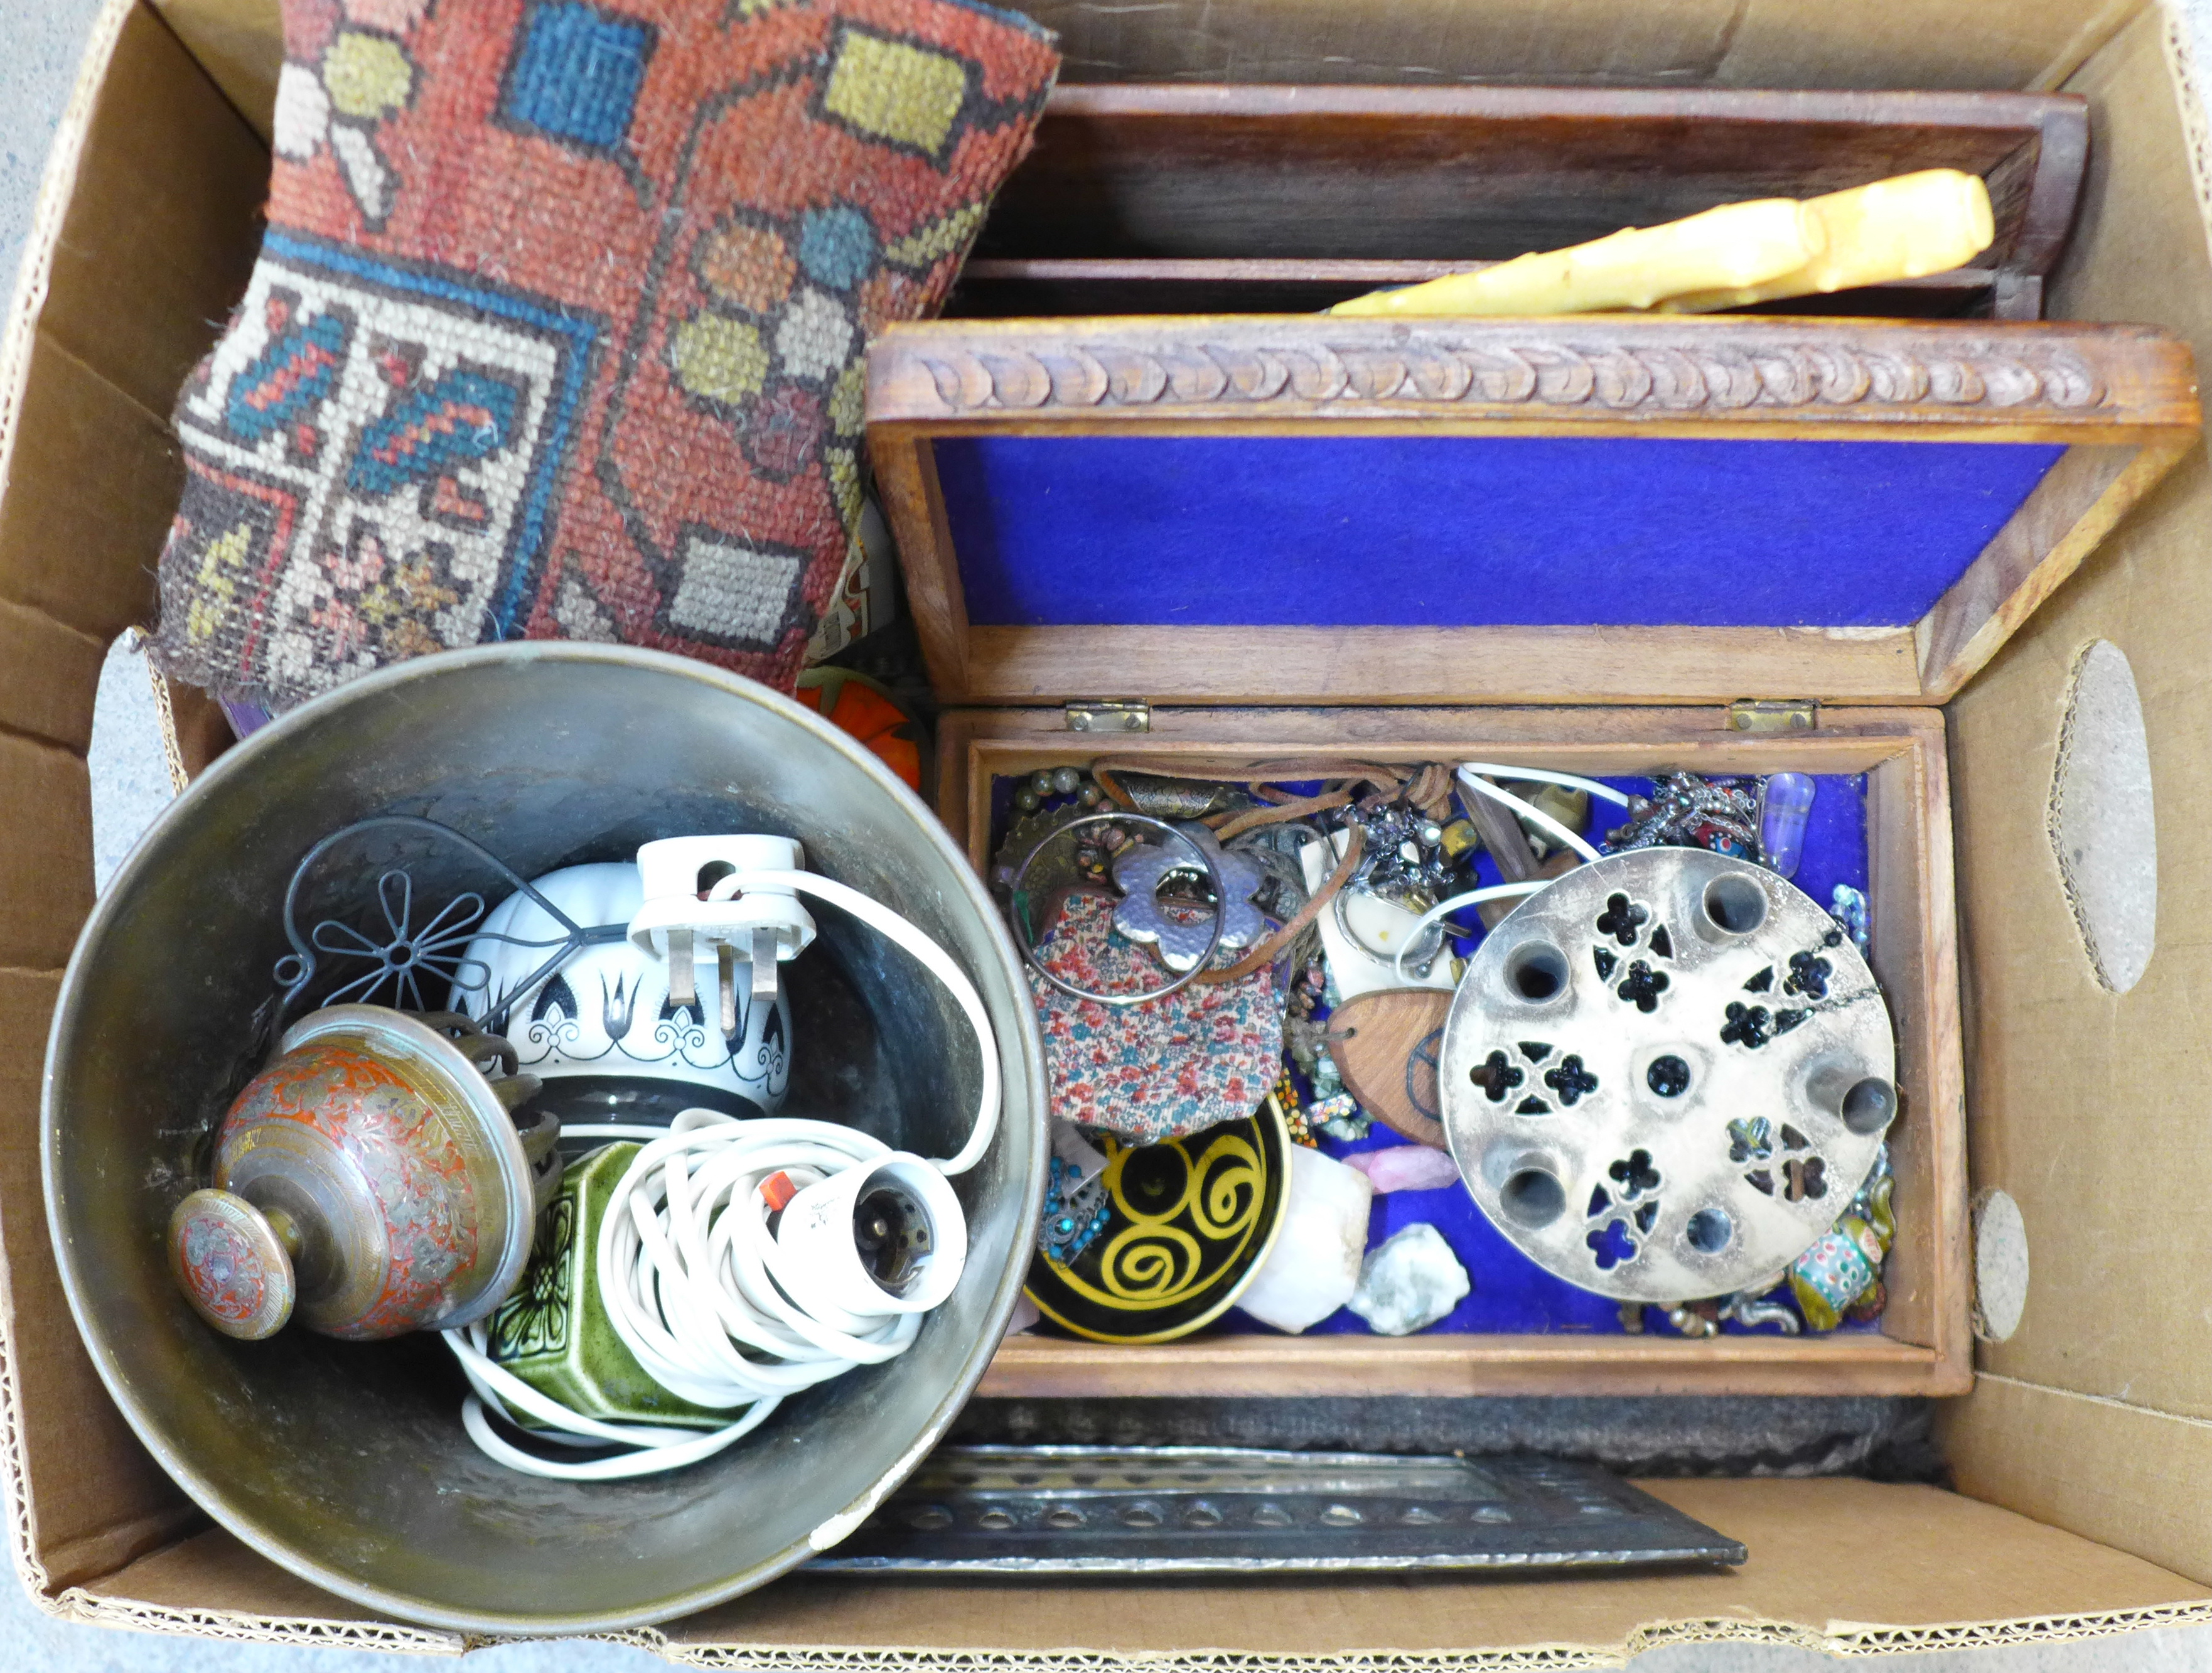 A box of assorted items, glass paperweights, a wooden box and letter rack, jewellery, etc.